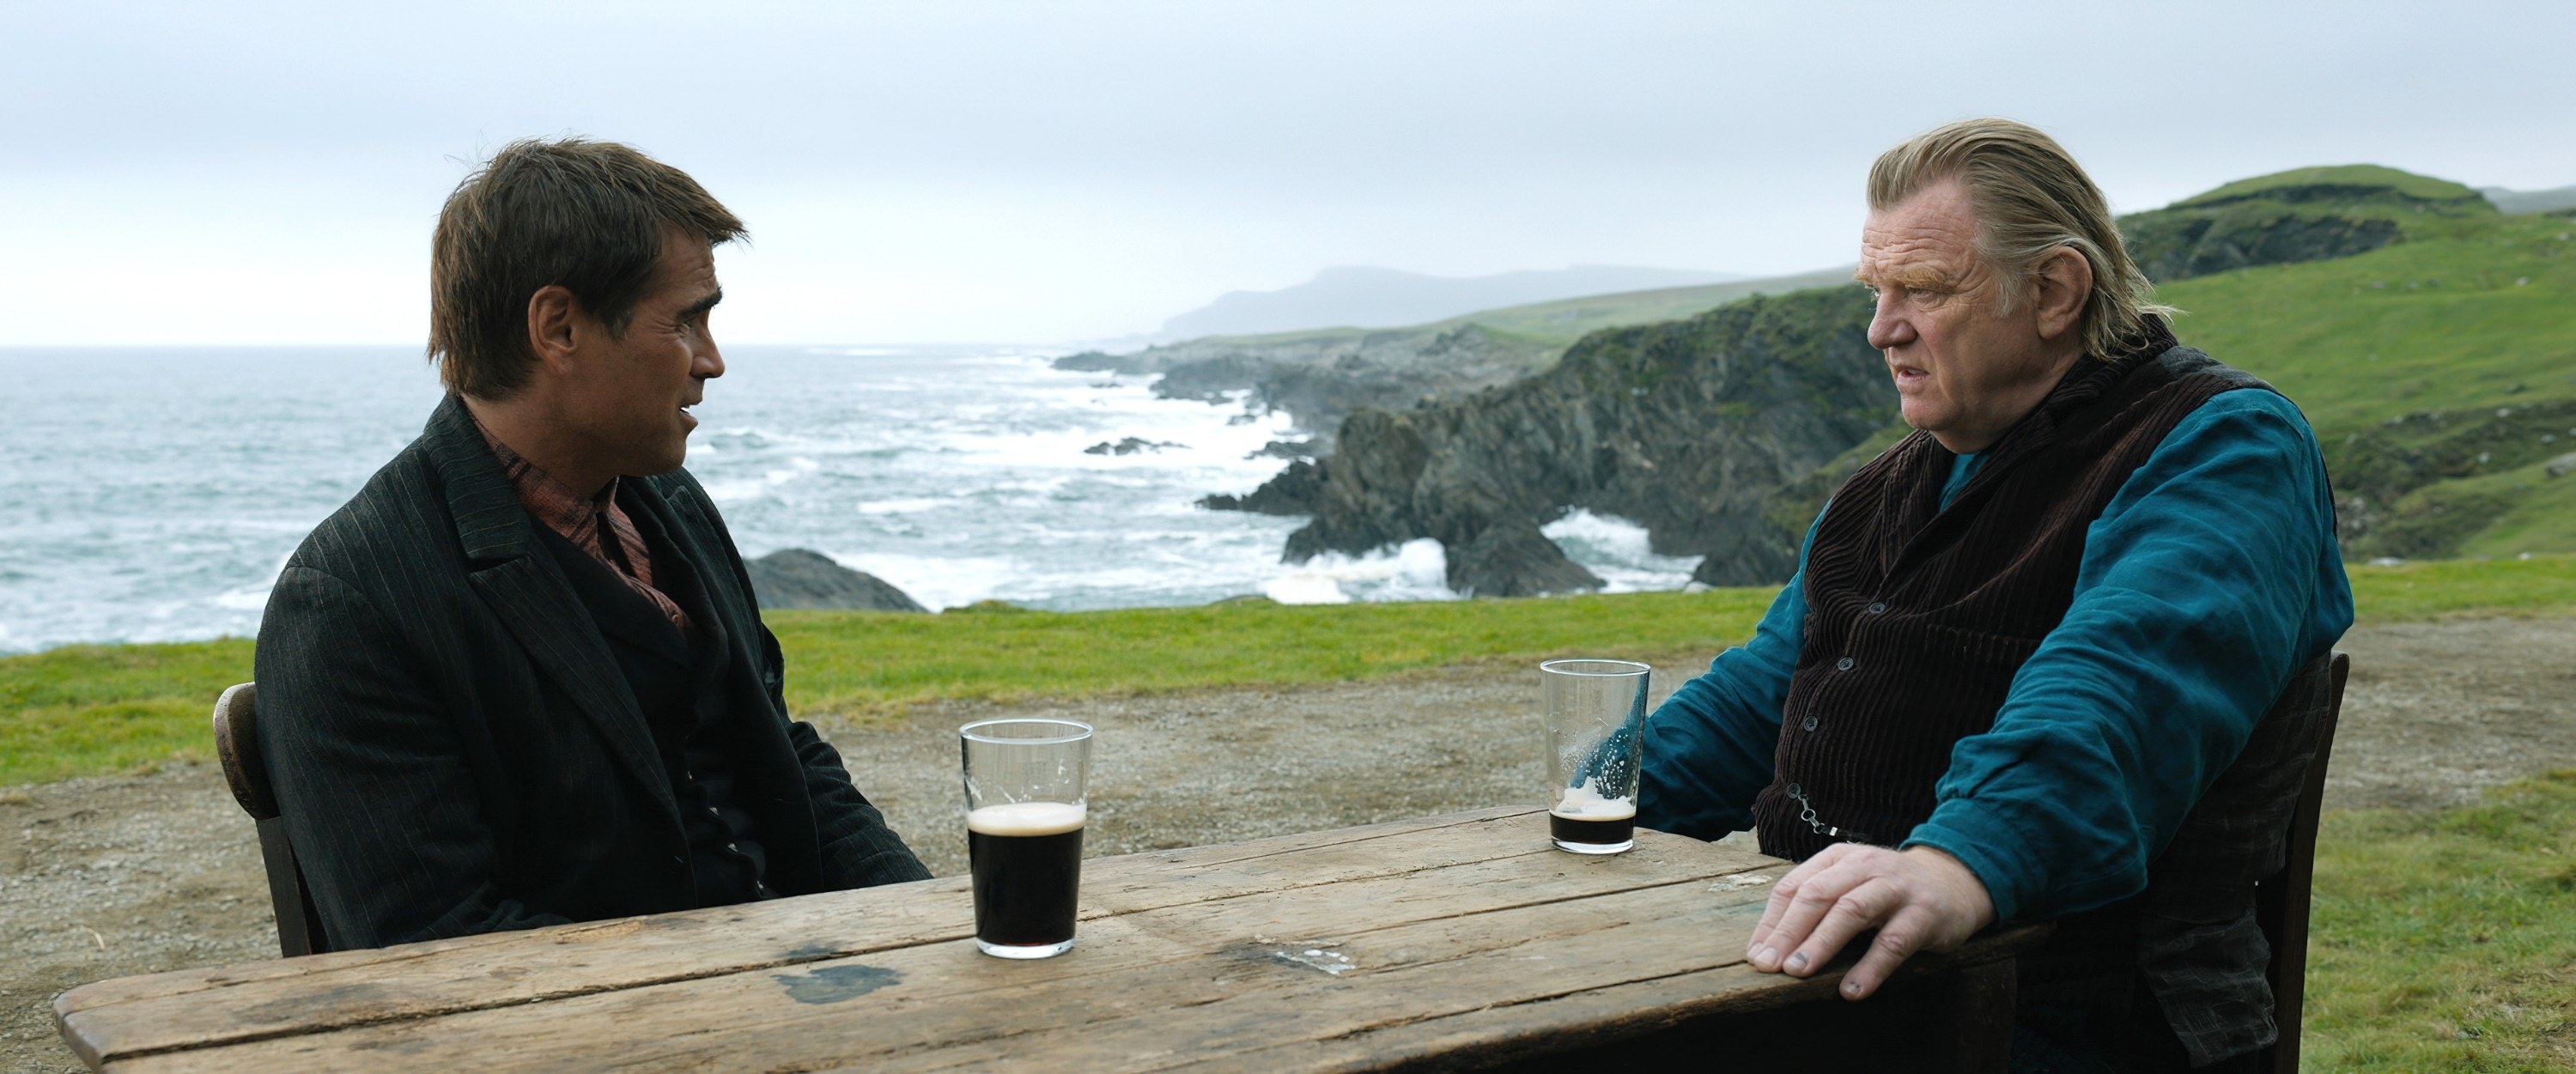 Colin Farrell and Brendan Gleeson drink beer by the ocean